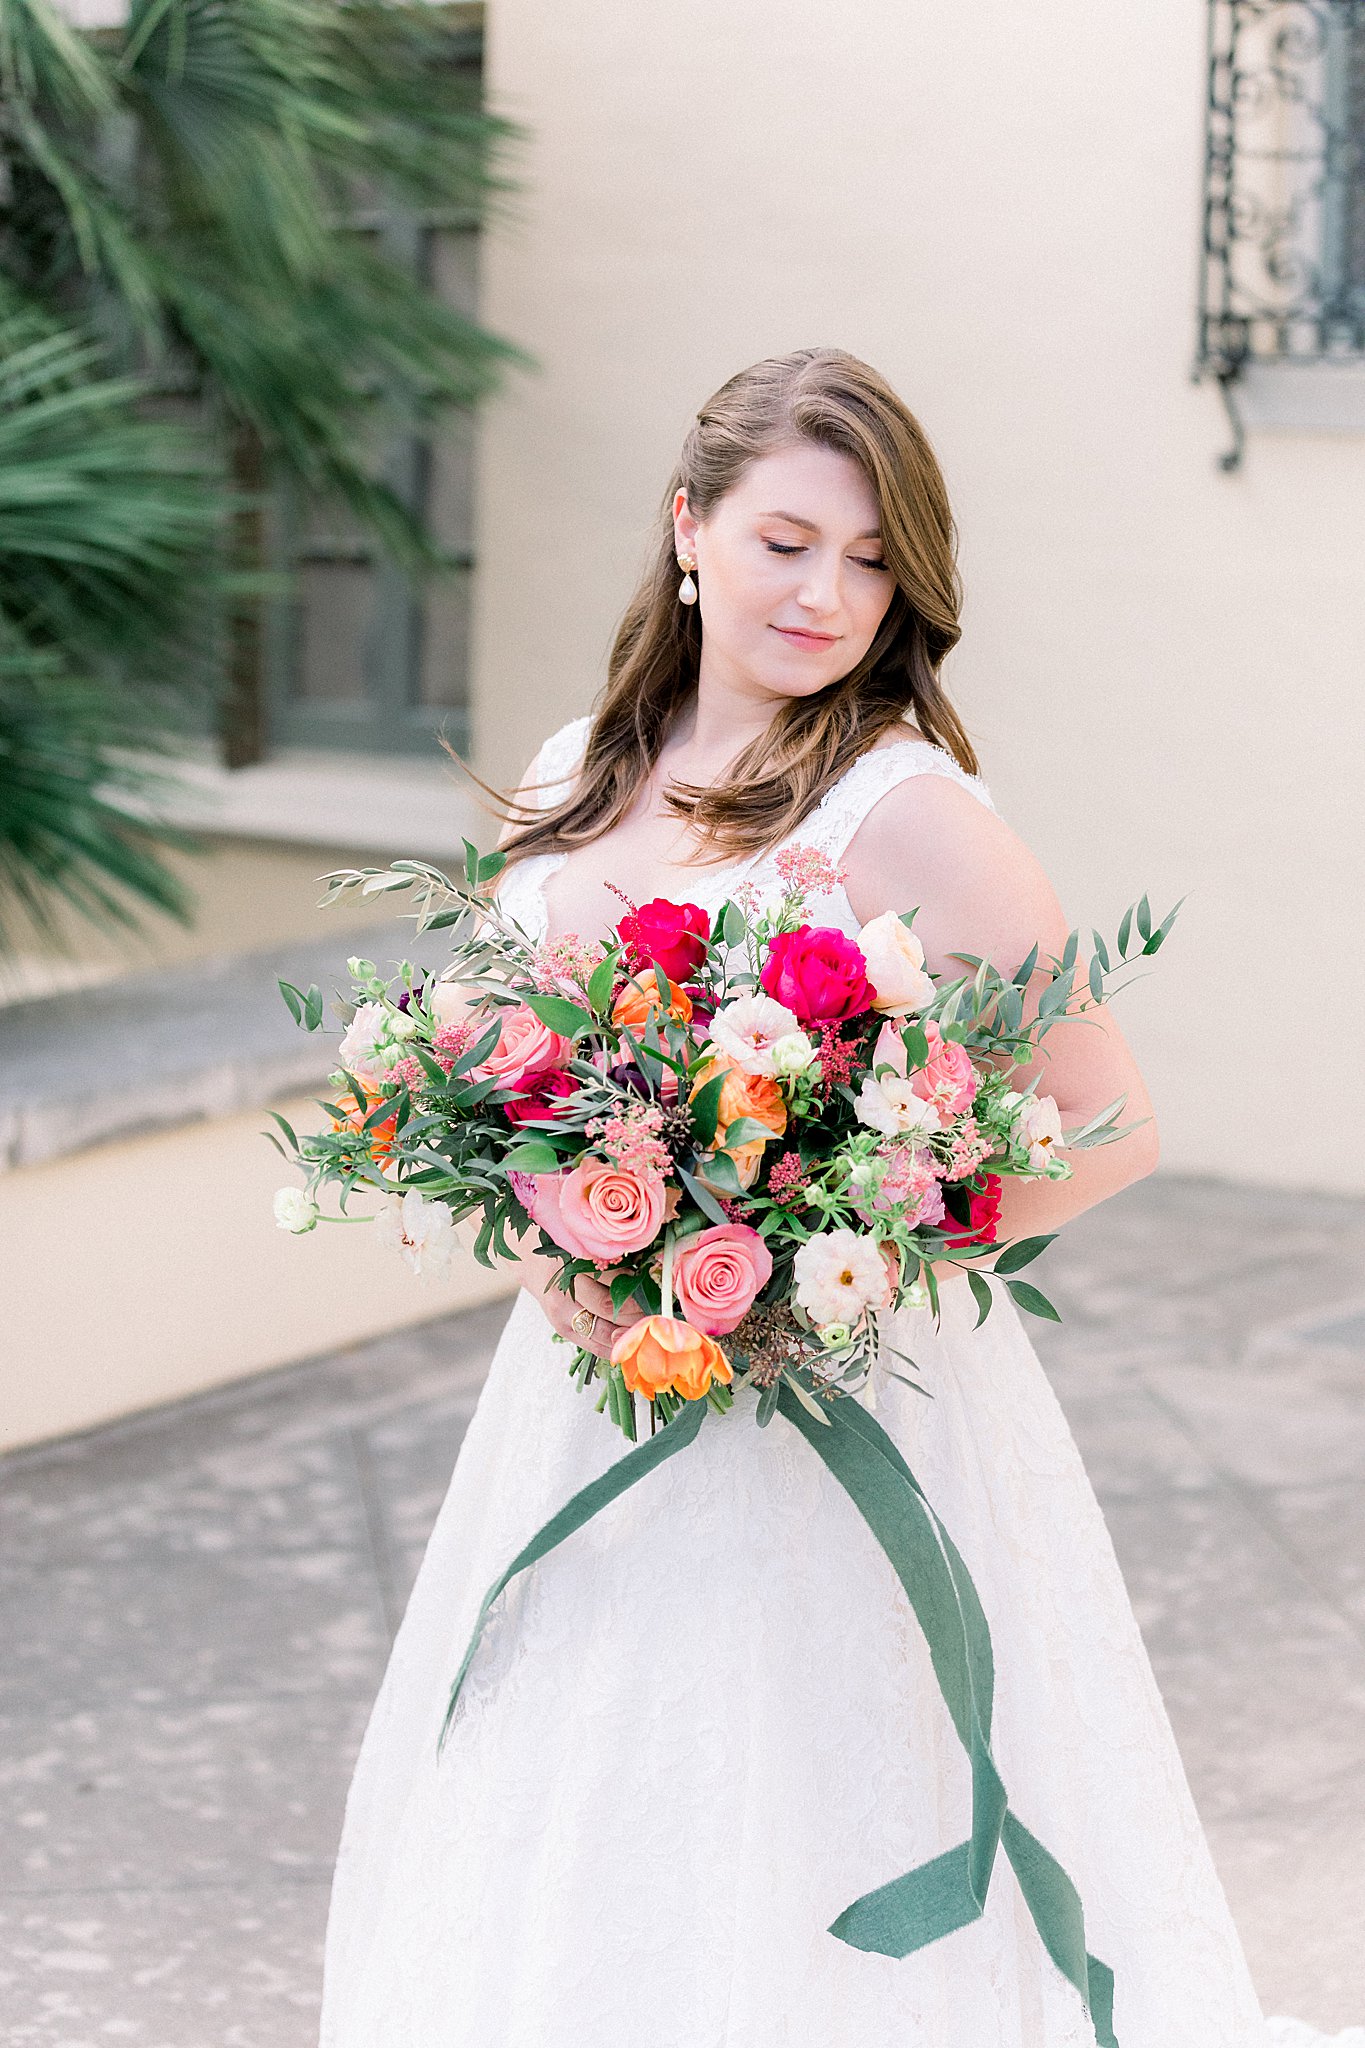 Bride with Bright Bouquet, Anna Kay Photography, Texas Wedding Photographer